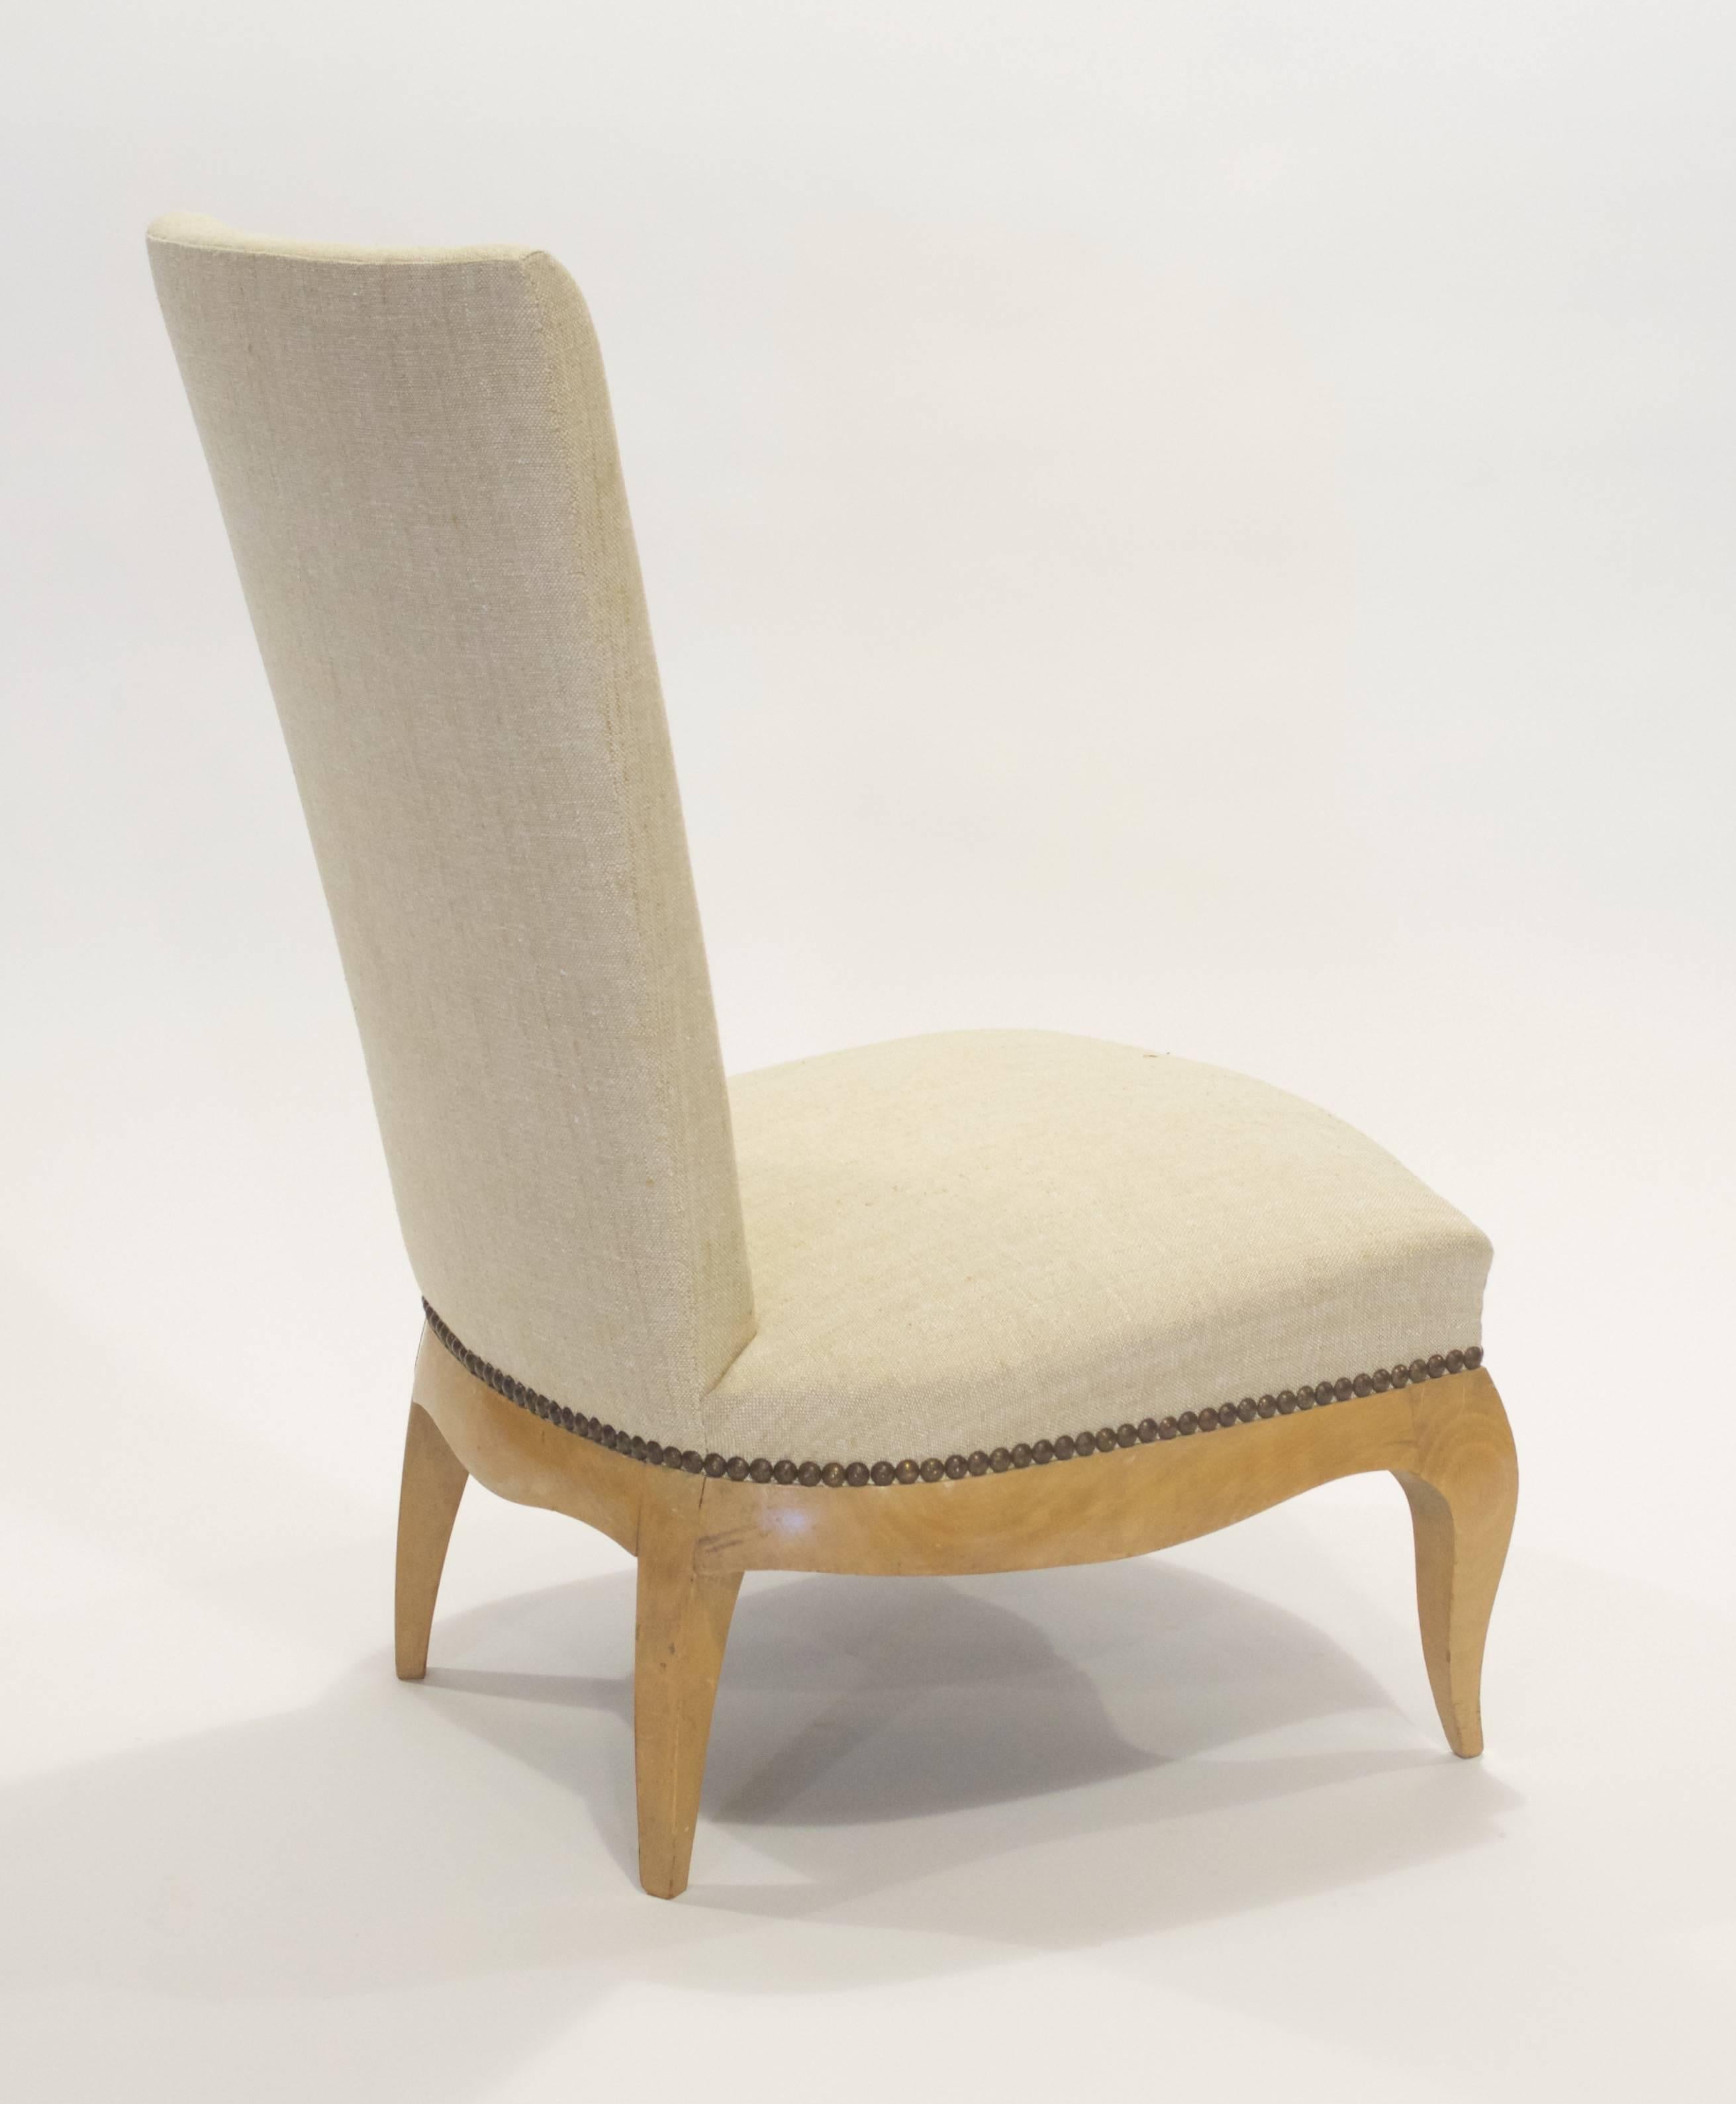 Mid-20th Century French Art Deco Slipper Chair by Rene Prou, circa 1930